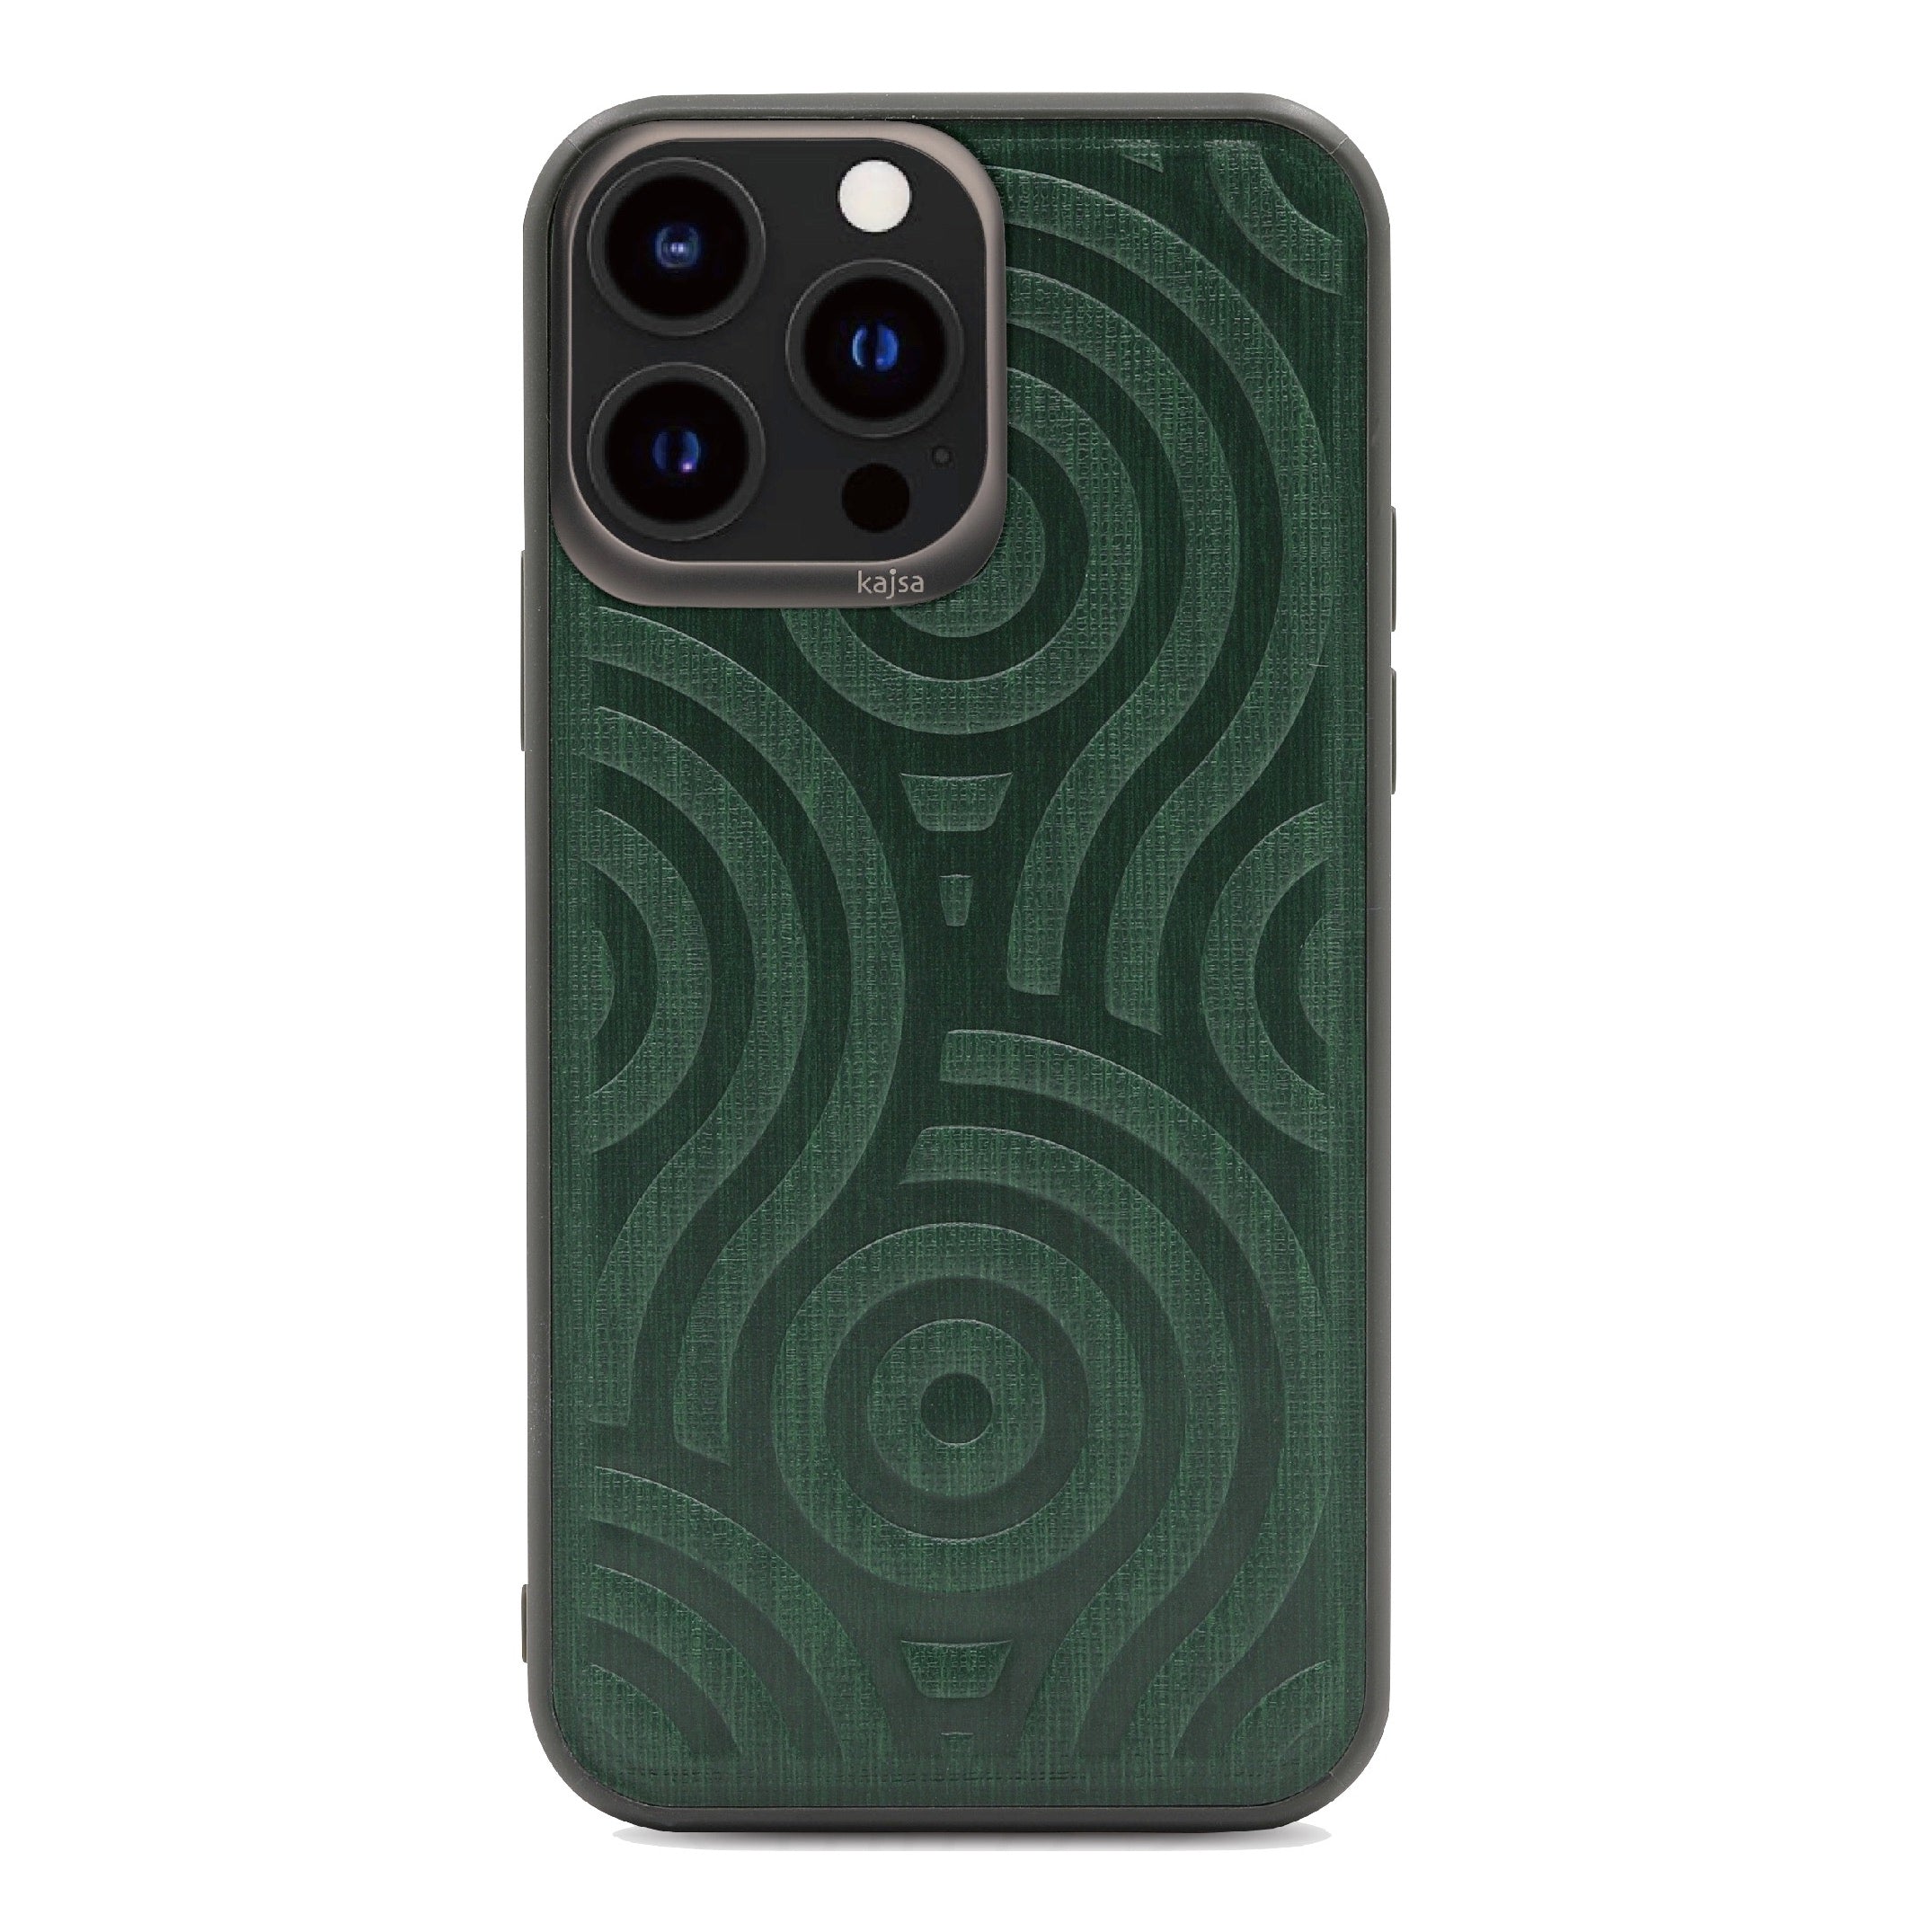 Briquette Collection - Sphere Back Case for iPhone 13-Phone Case- phone case - phone cases- phone cover- iphone cover- iphone case- iphone cases- leather case- leather cases- DIYCASE - custom case - leather cover - hand strap case - croco pattern case - snake pattern case - carbon fiber phone case - phone case brand - unique phone case - high quality - phone case brand - protective case - buy phone case hong kong - online buy phone case - iphone‎手機殼 - 客製化手機殼 - samsung ‎手機殼 - 香港手機殼 - 買電話殼